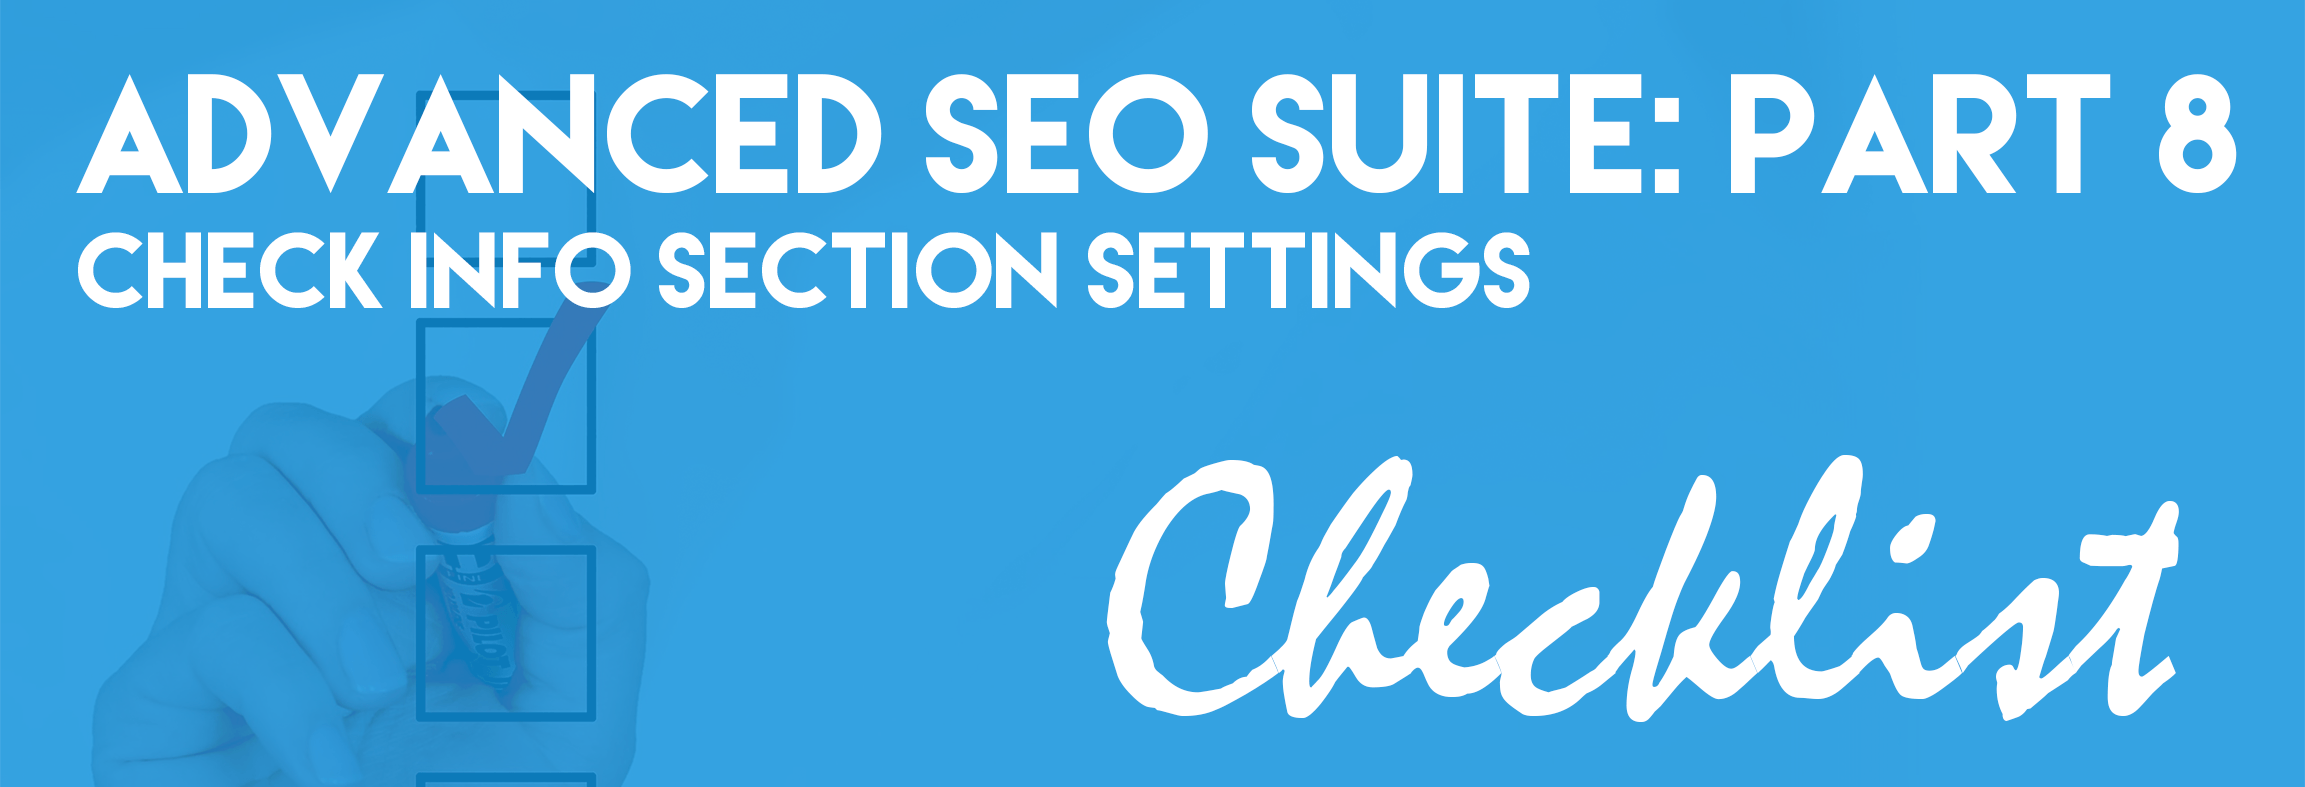 Advanced SEO Suite Onboarding Checklist (Part 8): Check Info Section Settings